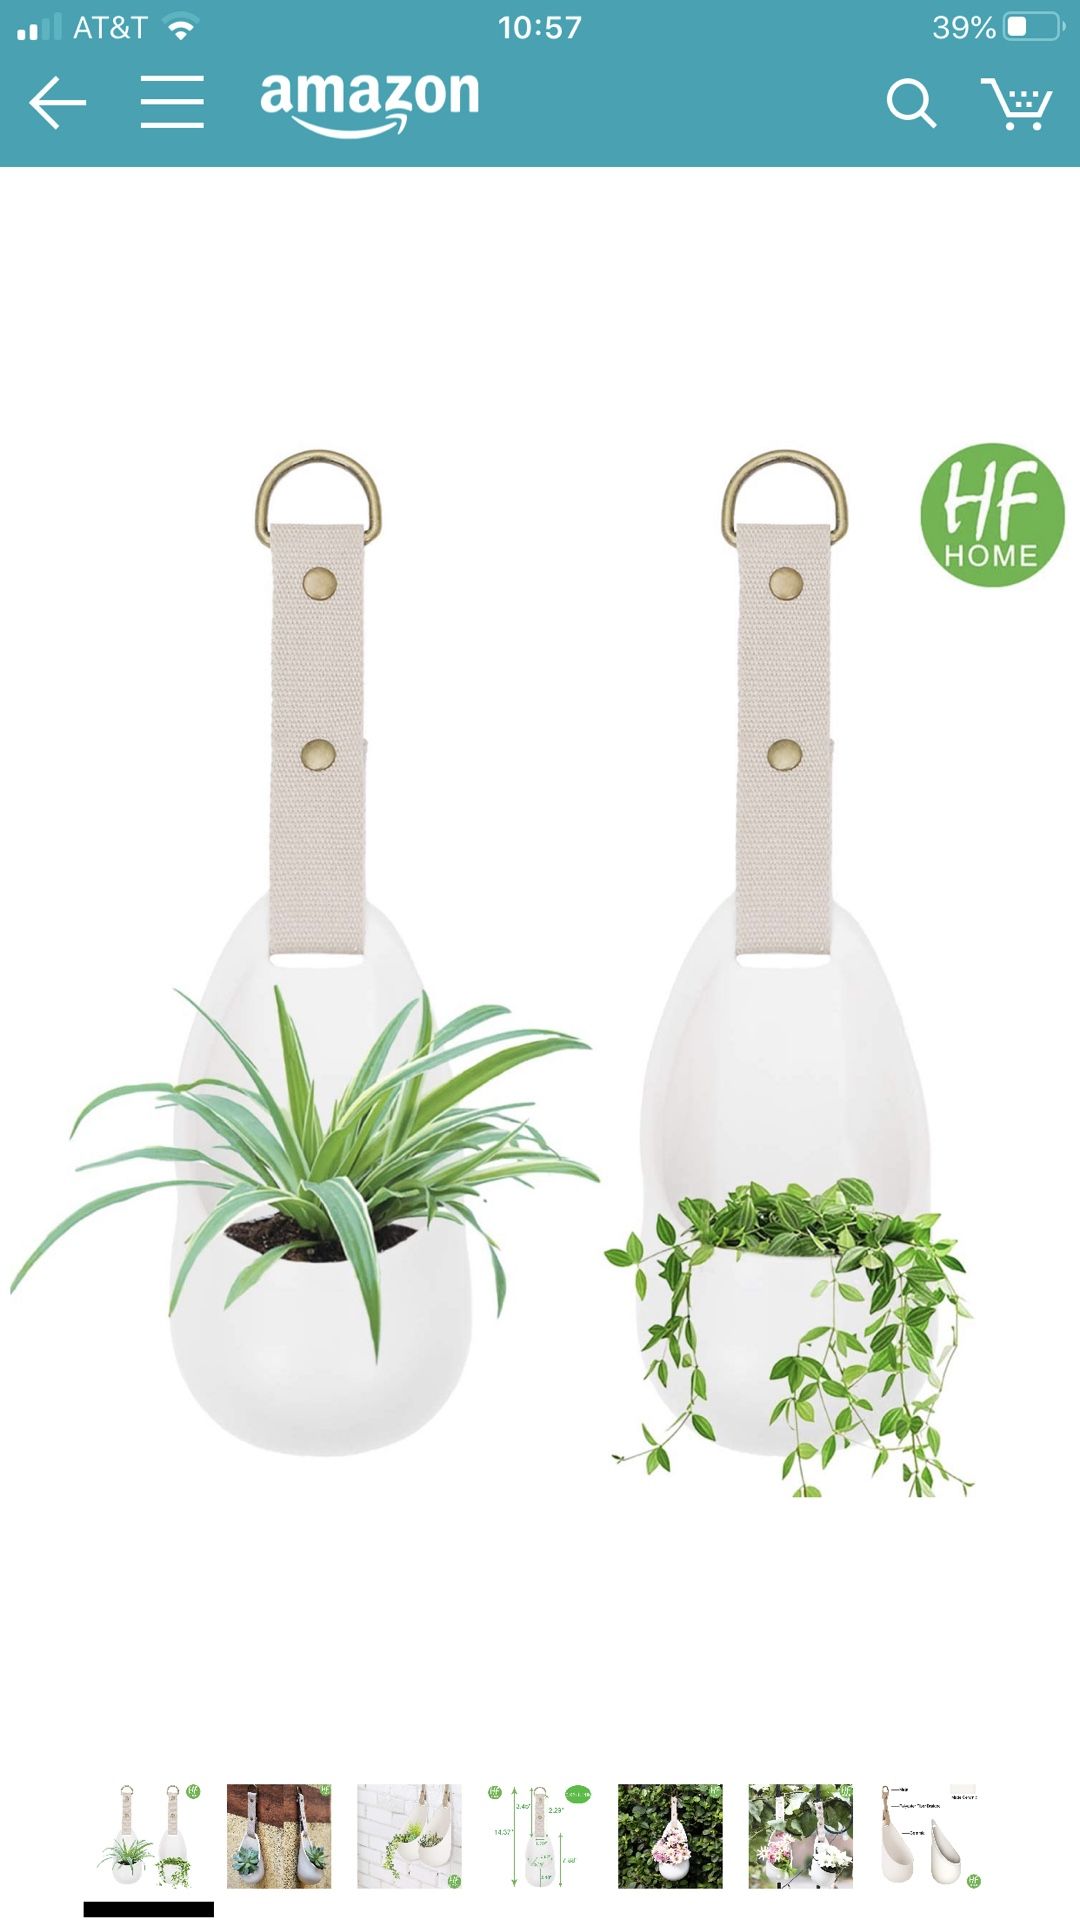 Set 2 Wall Hanging Planters with Strap, Modern Wall Decor Unglazed Ceramic Air Plant Holder Indoor Home Decor Plant Hanger - White